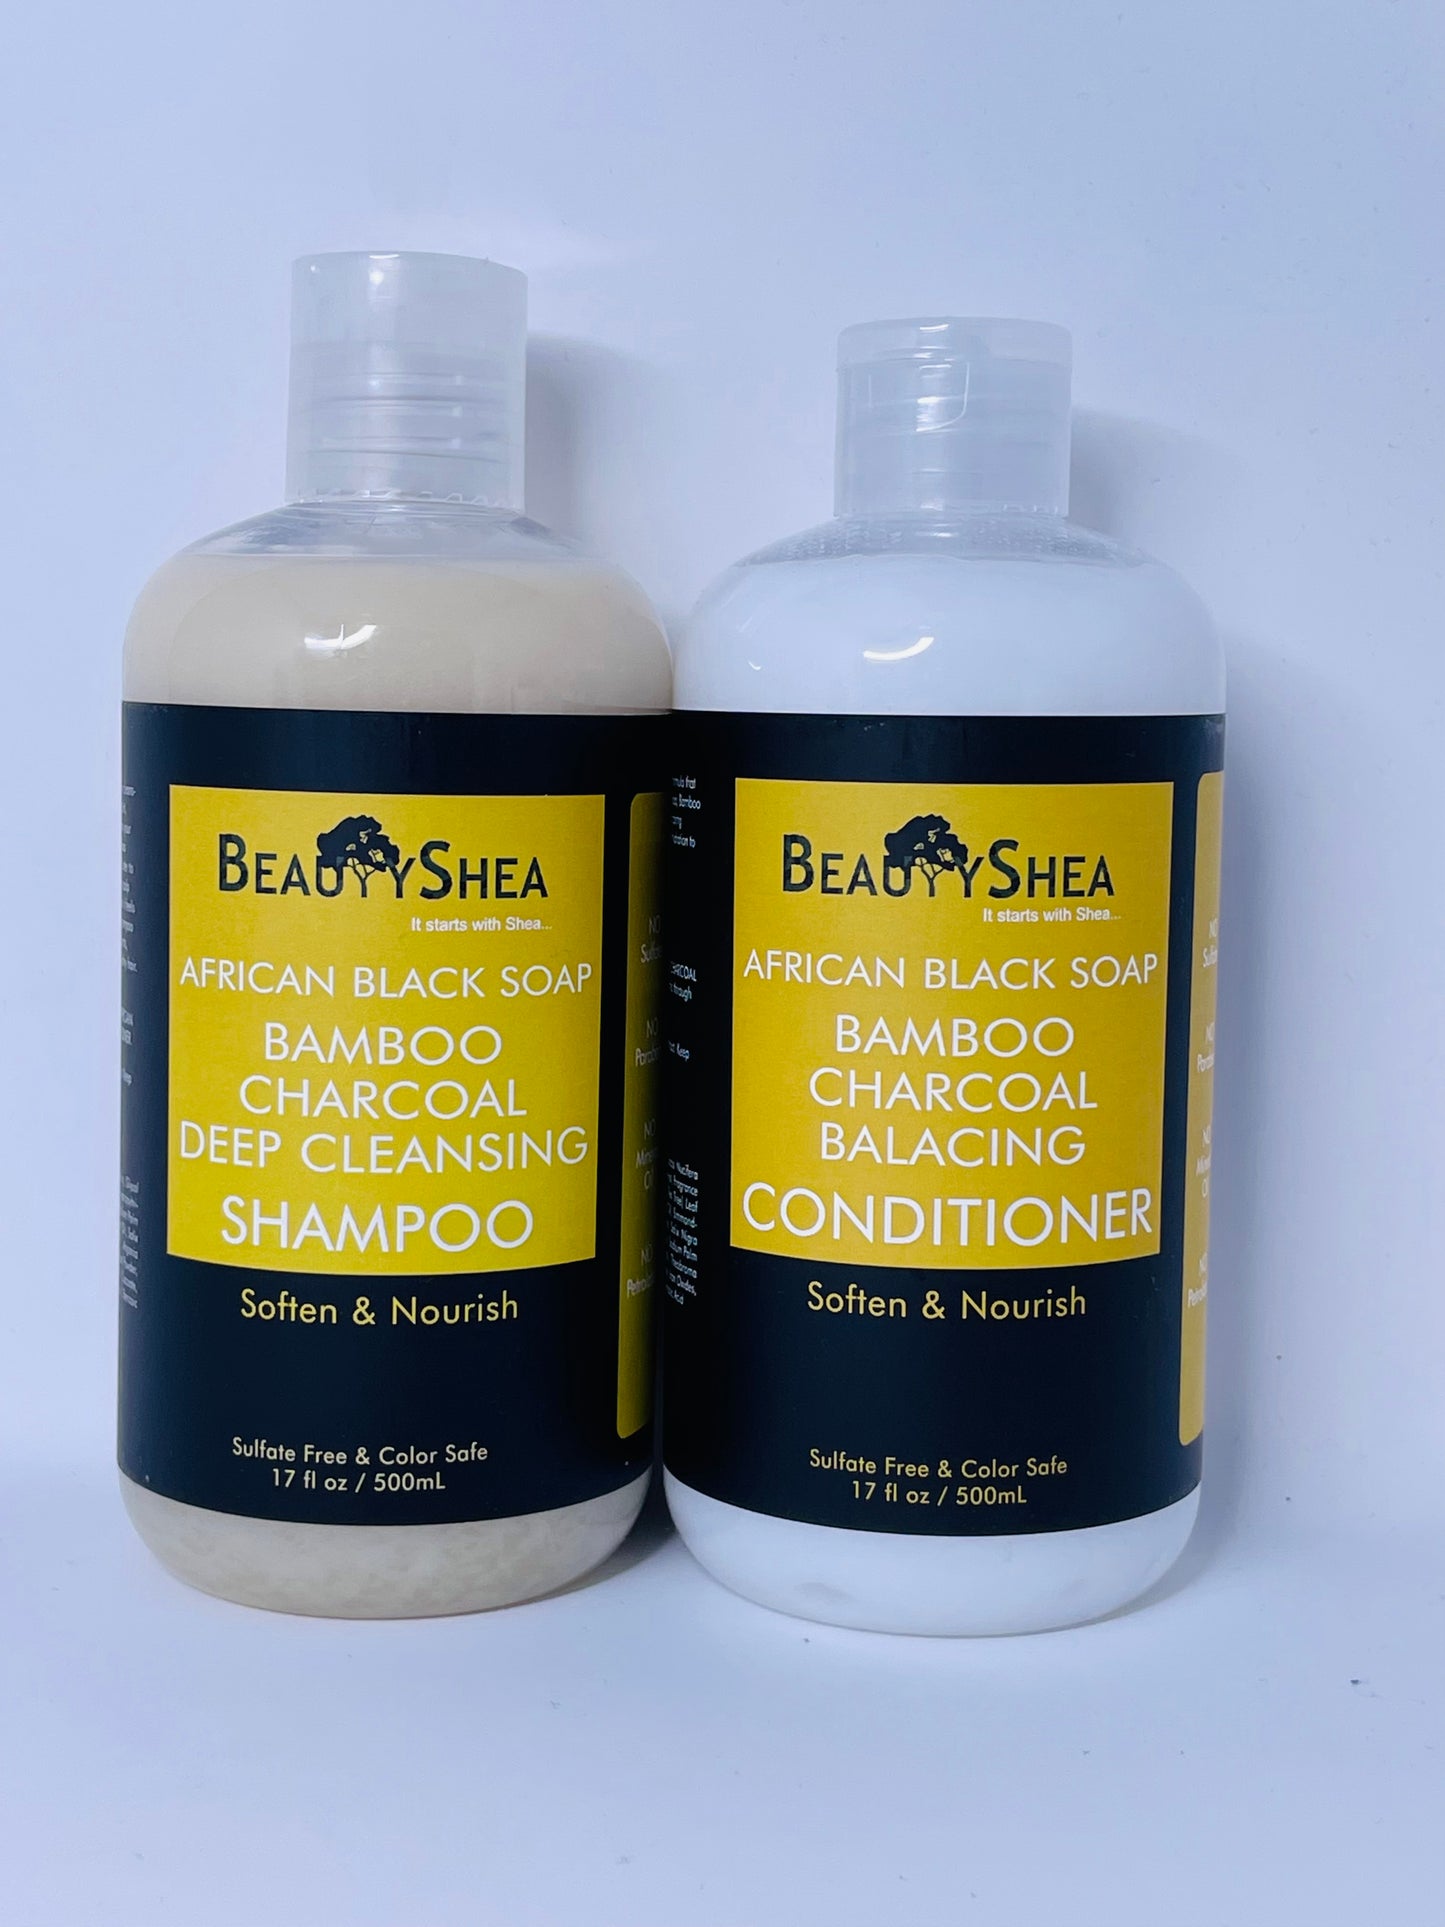 Bamboo Charcoal Deep Cleansing Shampoo & Balancing Conditioner